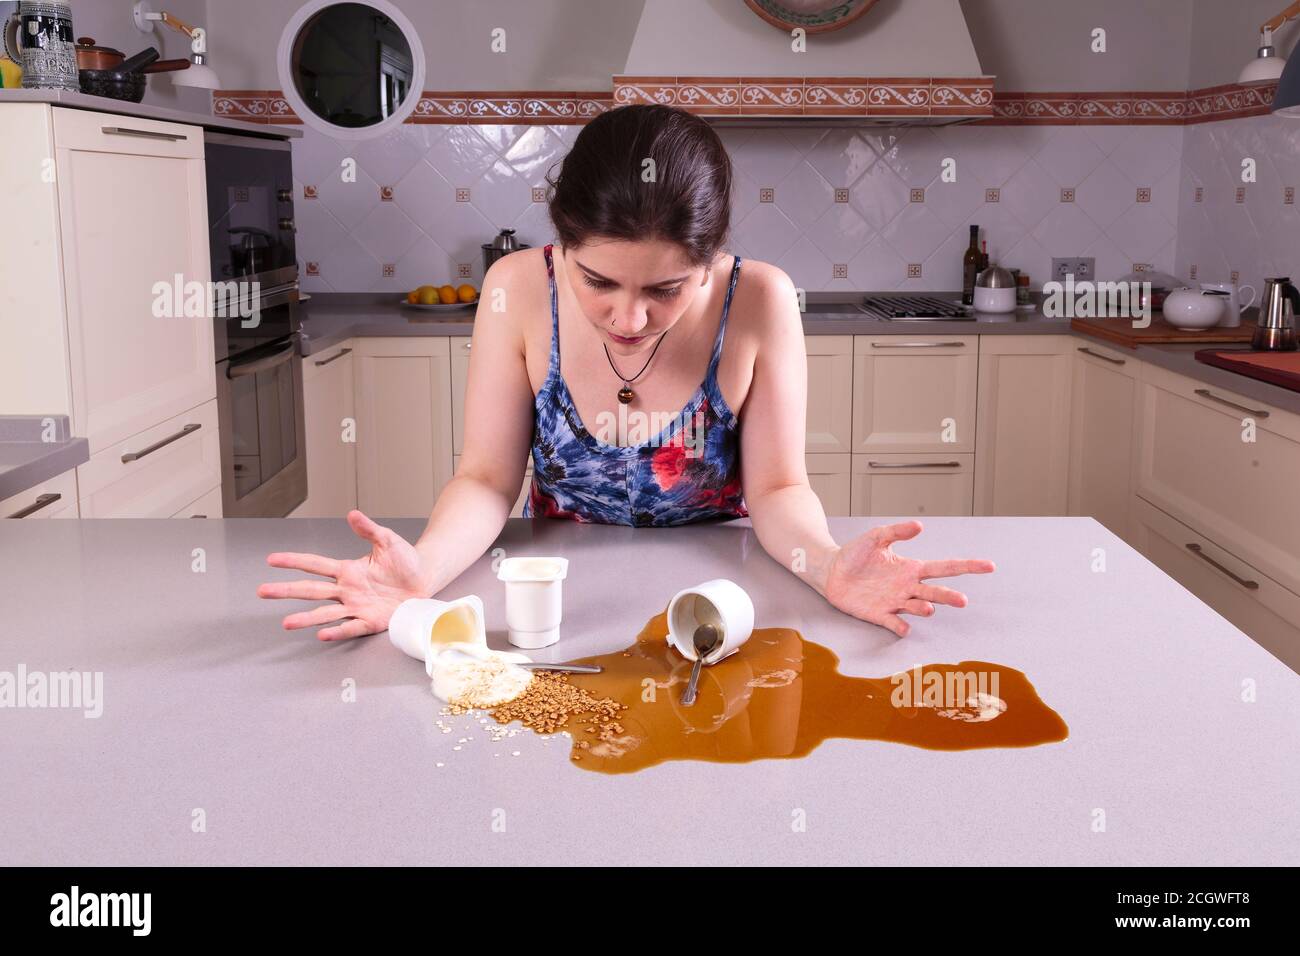 Pretty young woman looking perplexed at a mess on the counter Stock Photo